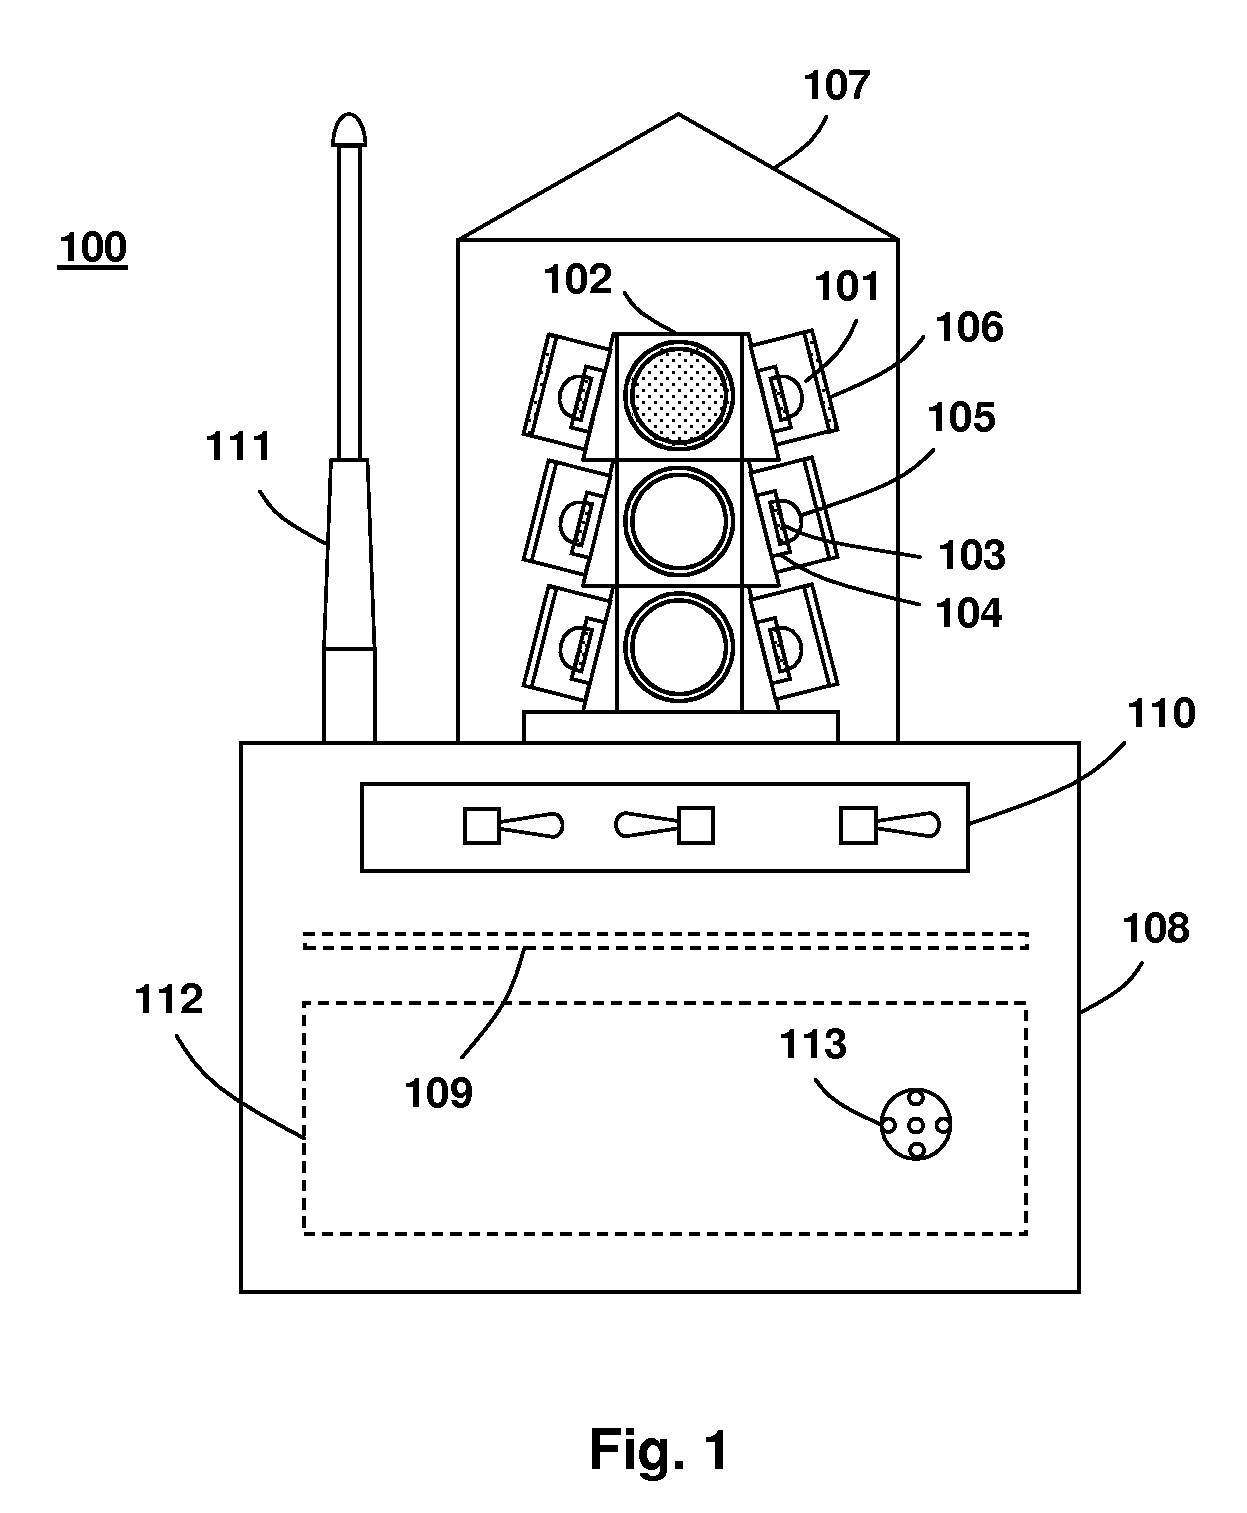 LED signaling apparatus with infrared emission